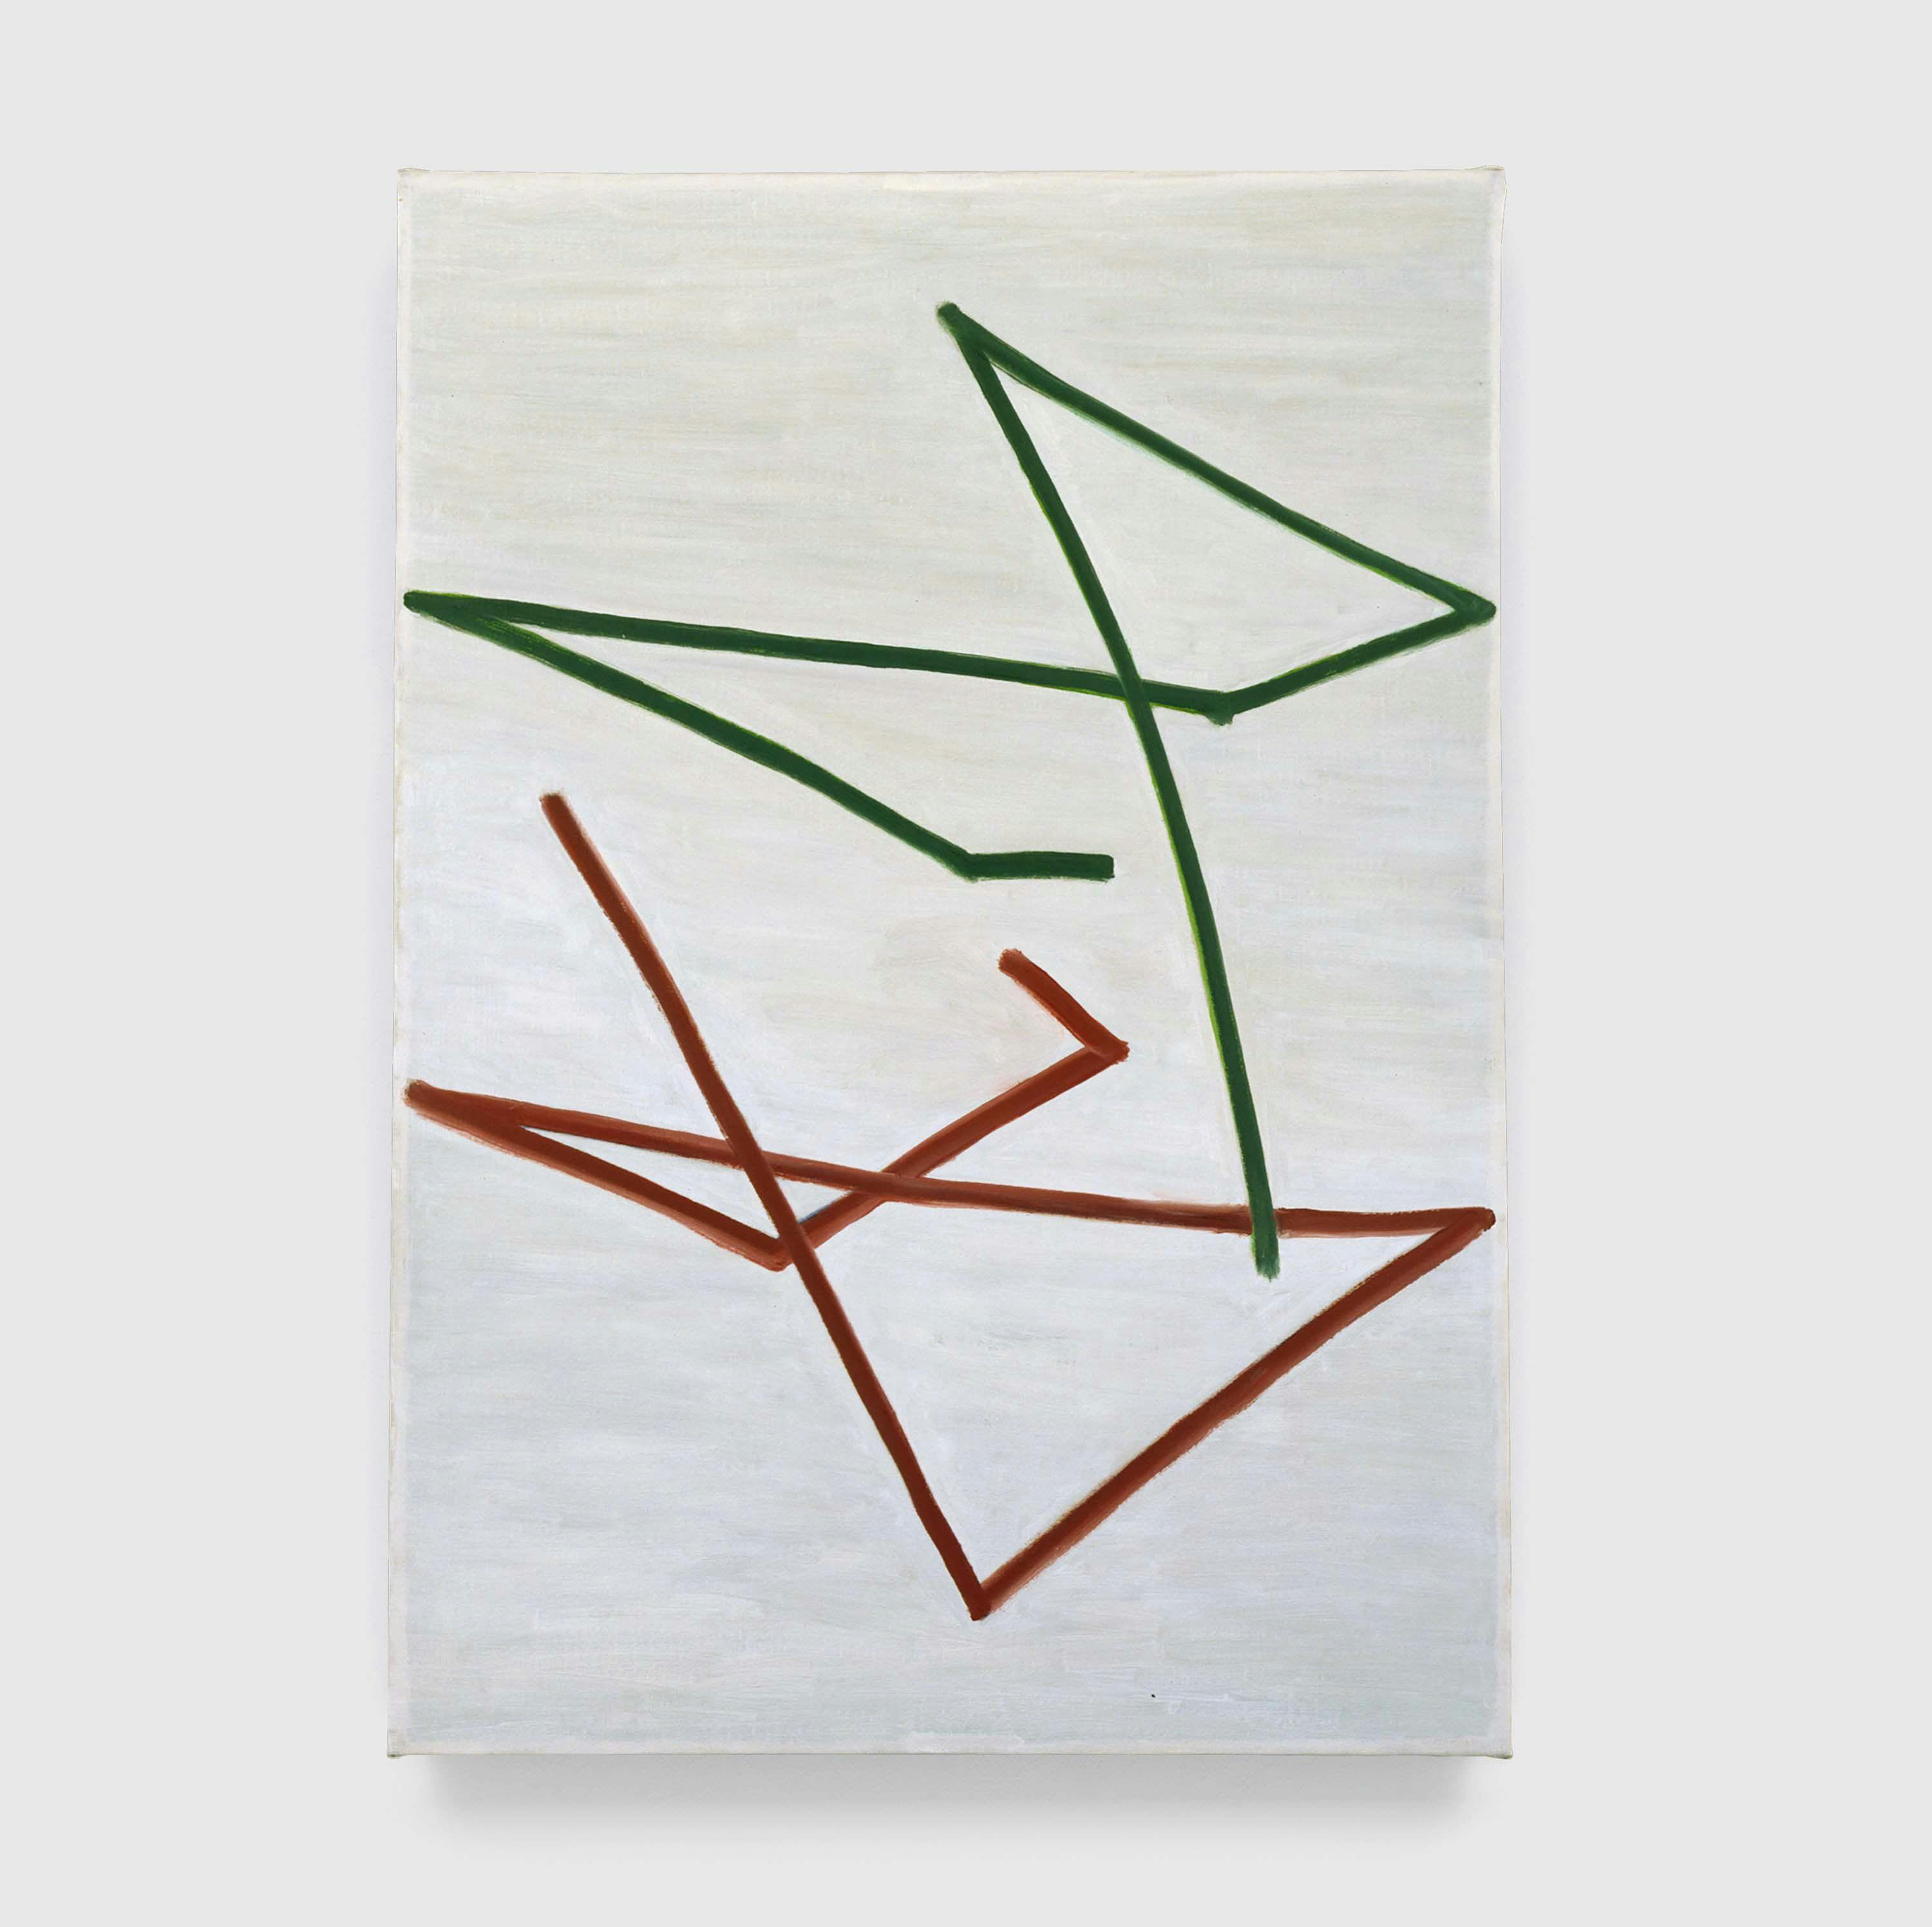 A painting by Raoul de Keyser, titled Come on, play it again nr. 7, dated 2001.